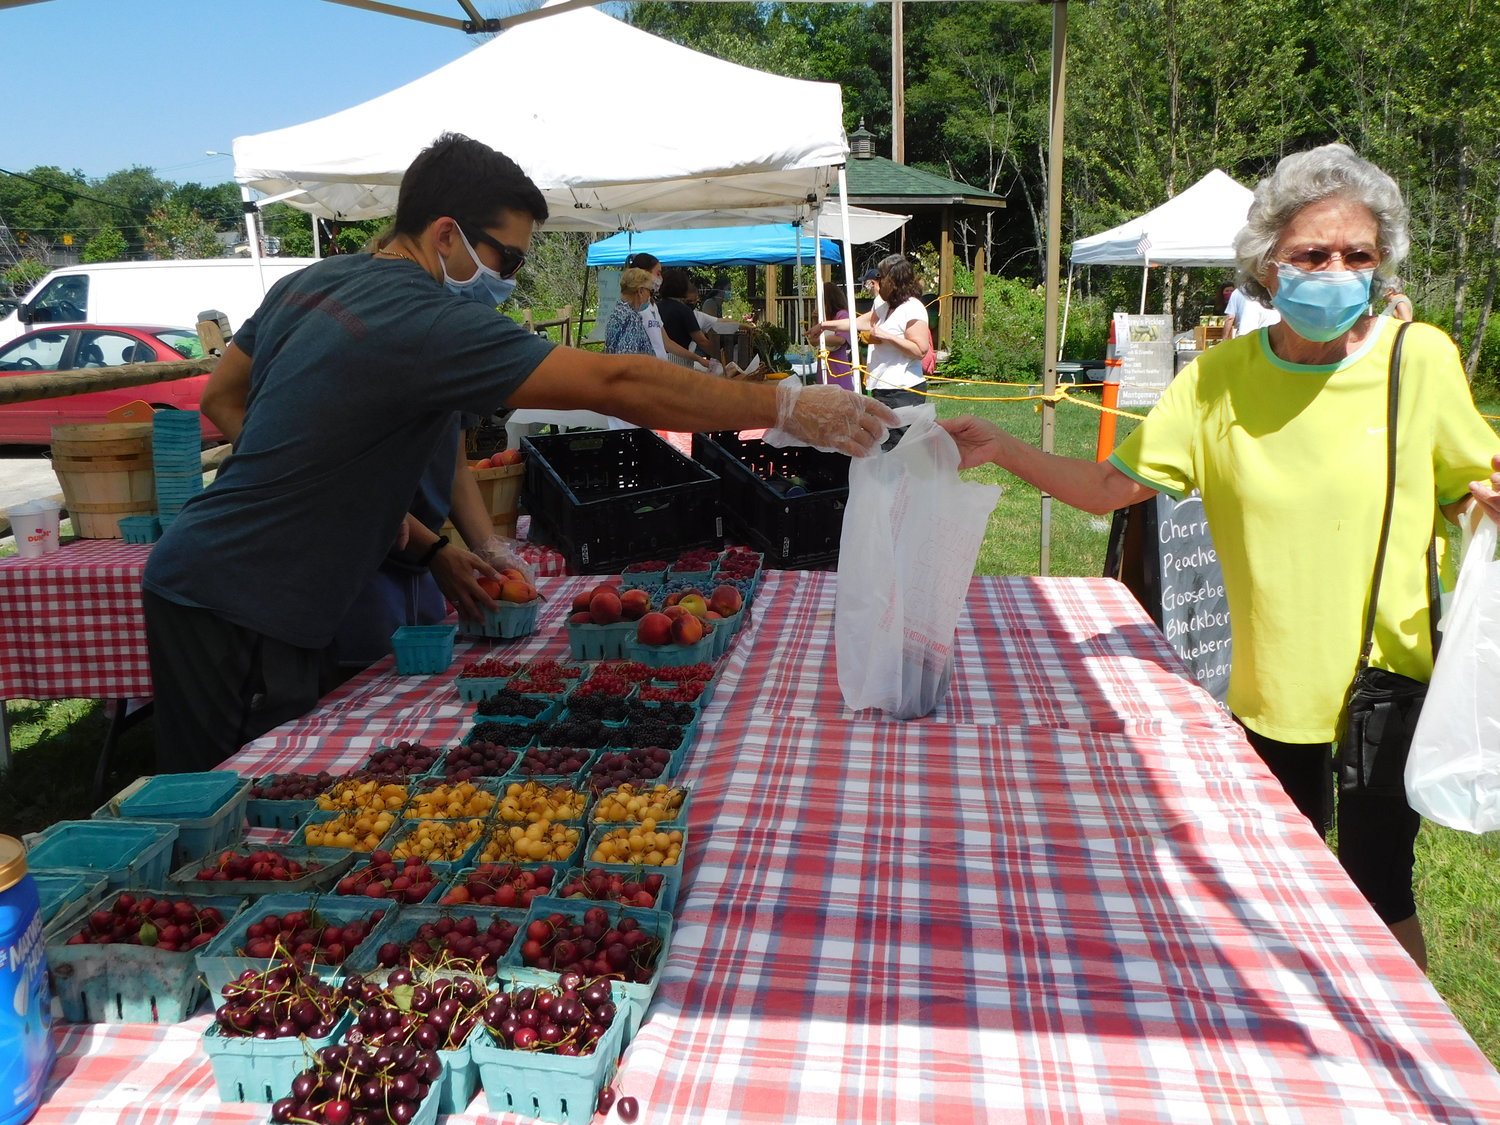 Farmers’ markets are a great way to support your local farmers.